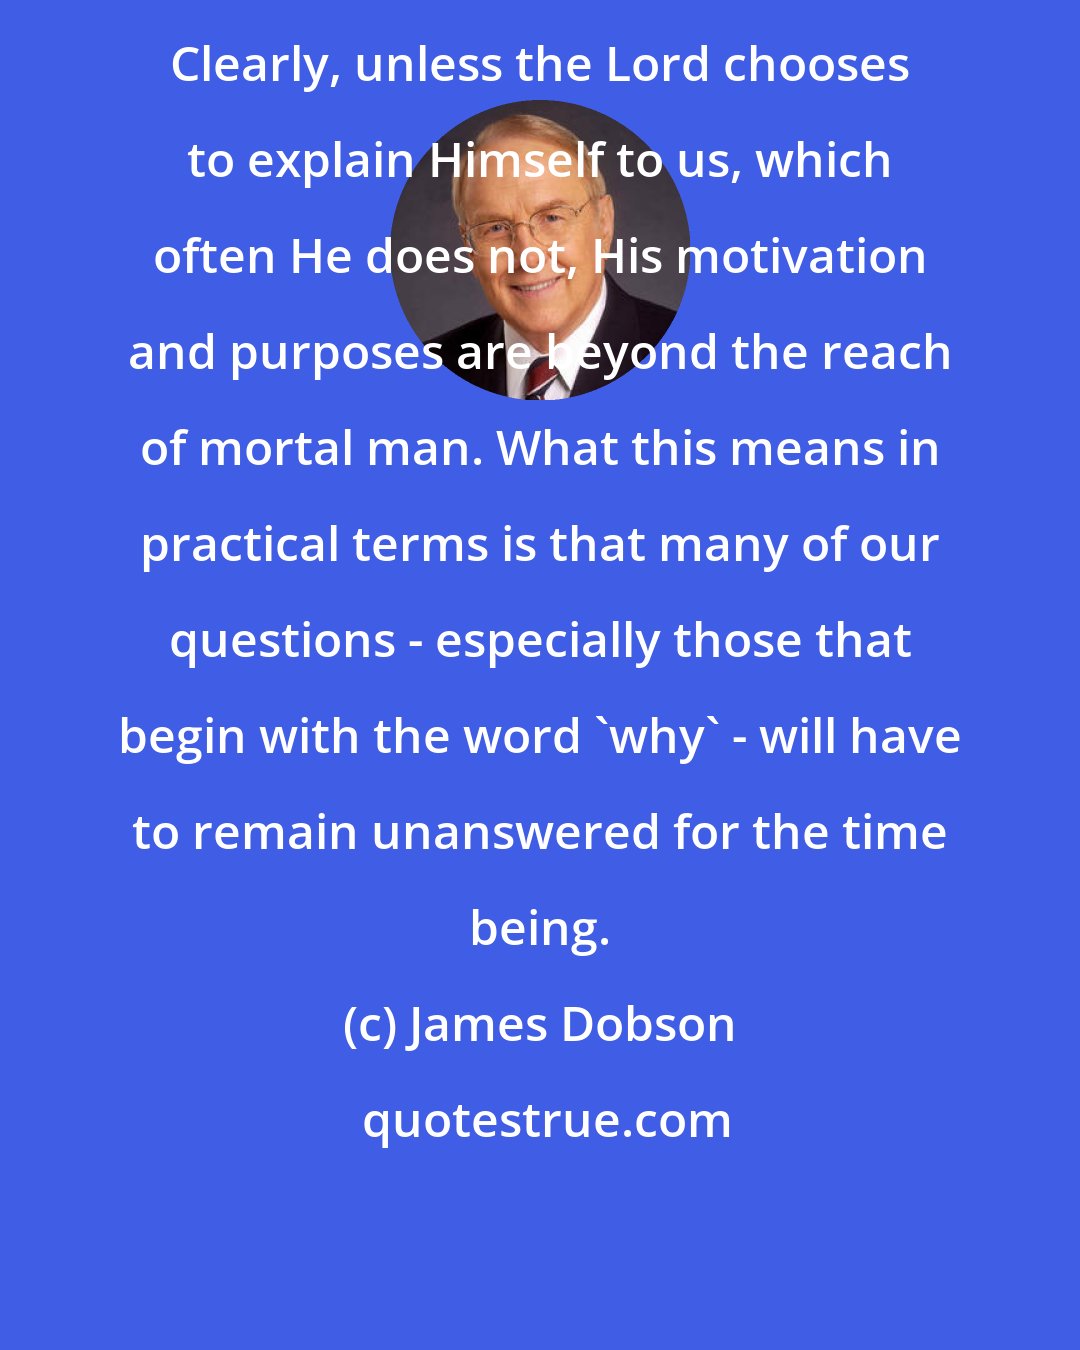 James Dobson: Clearly, unless the Lord chooses to explain Himself to us, which often He does not, His motivation and purposes are beyond the reach of mortal man. What this means in practical terms is that many of our questions - especially those that begin with the word 'why' - will have to remain unanswered for the time being.